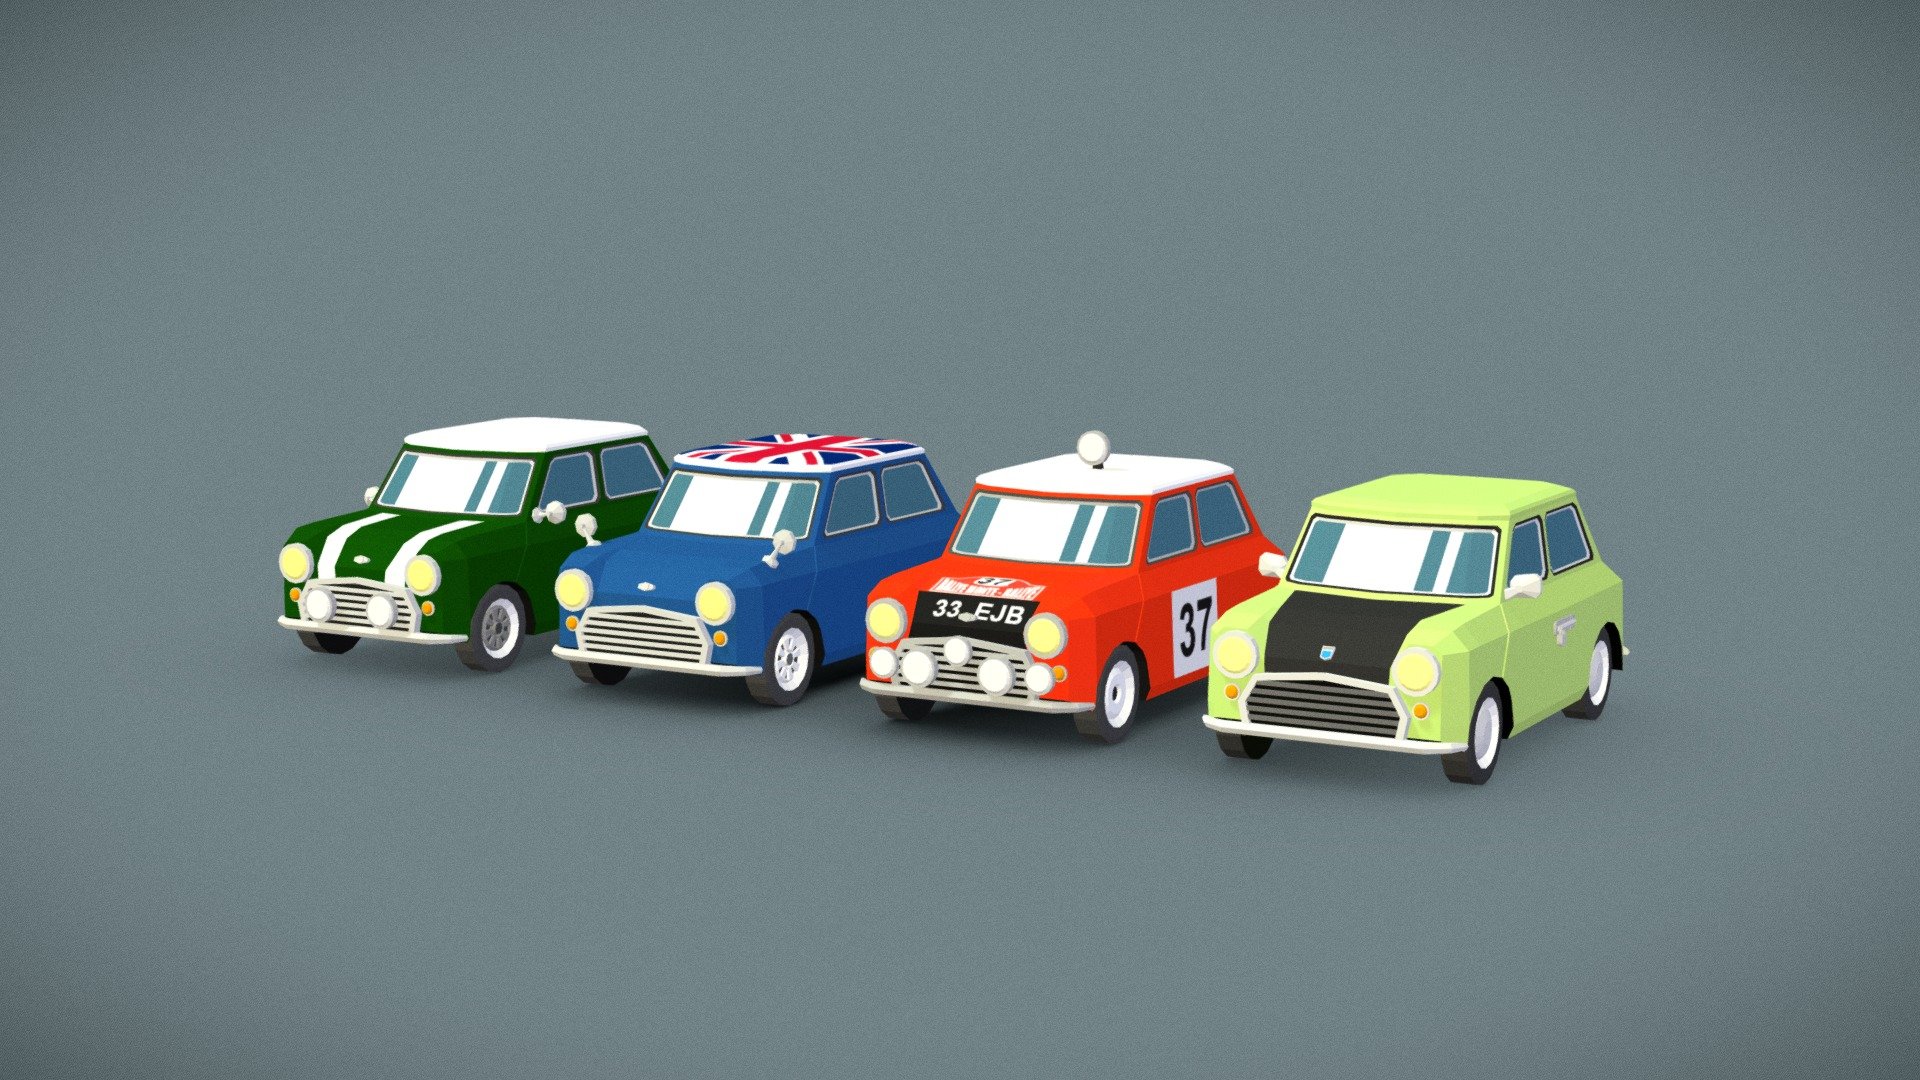 A pack of low poly small classic cartoon cars from around 1960s or 1970s.

There are 4 cars in the pack:
1. Dark green with white stripes
2. Dark blue with a flag colored roof
3. Red Rally car with additional lights
4. Light green with a black engine hood




The models are flat shaded low poly colored with a texture.

Can be easily recolored.

Optimized for mobile games.

The pack includes all four cars in one file as well as additional 4 files with individual cars per file 3d model